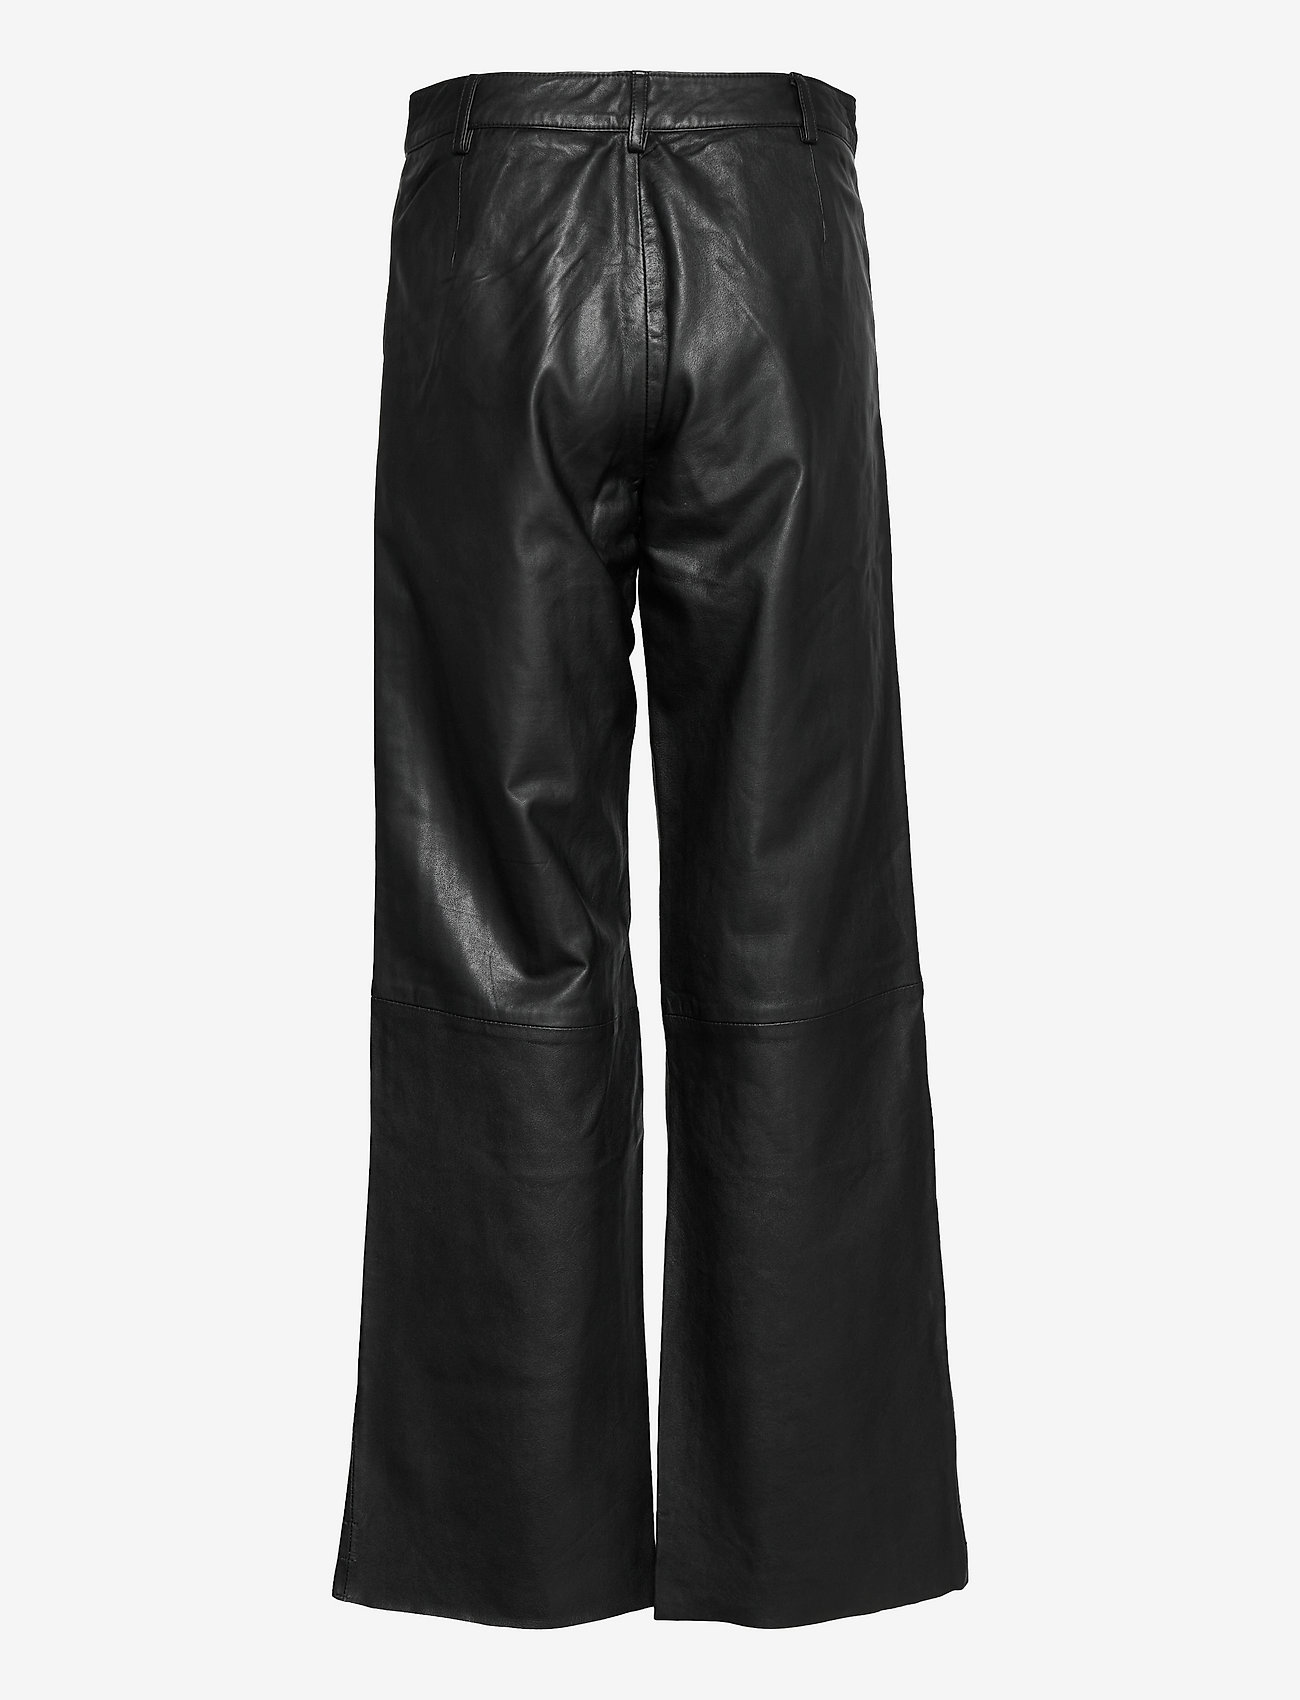 DEPECHE - Pants - party wear at outlet prices - 099 black (nero) - 1